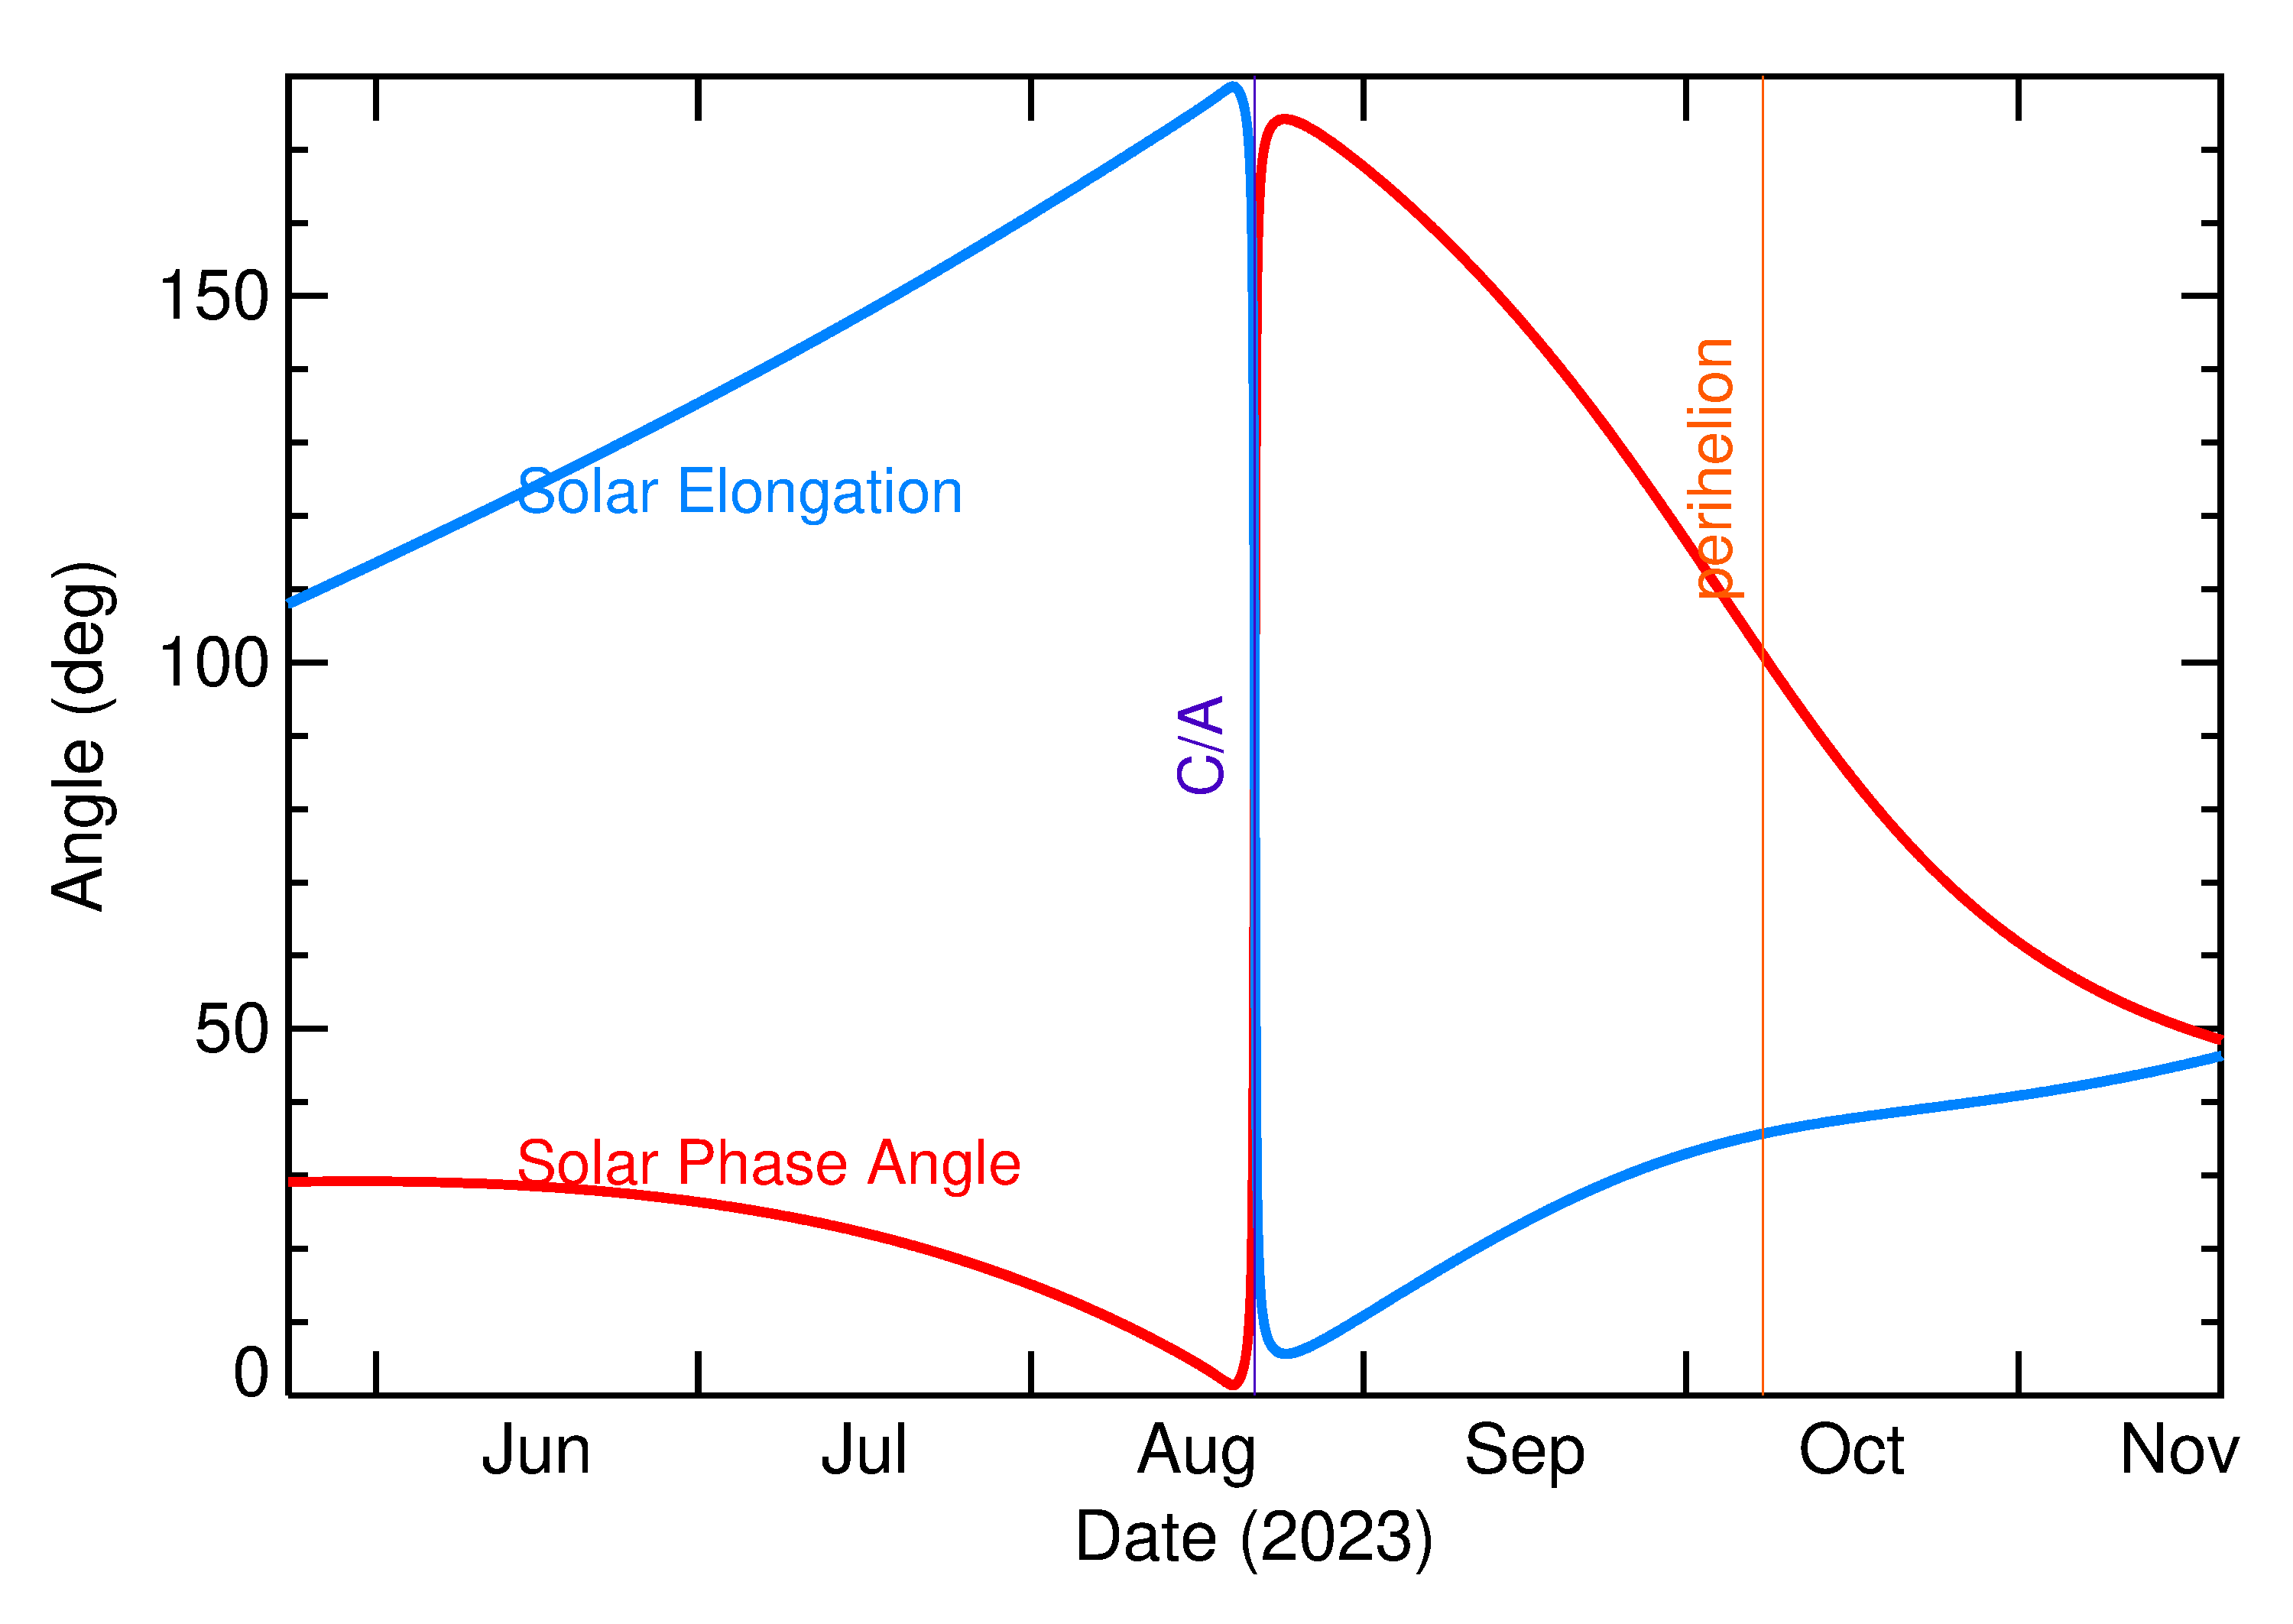 Solar Elongation and Solar Phase Angle of 2023 QR in the months around closest approach